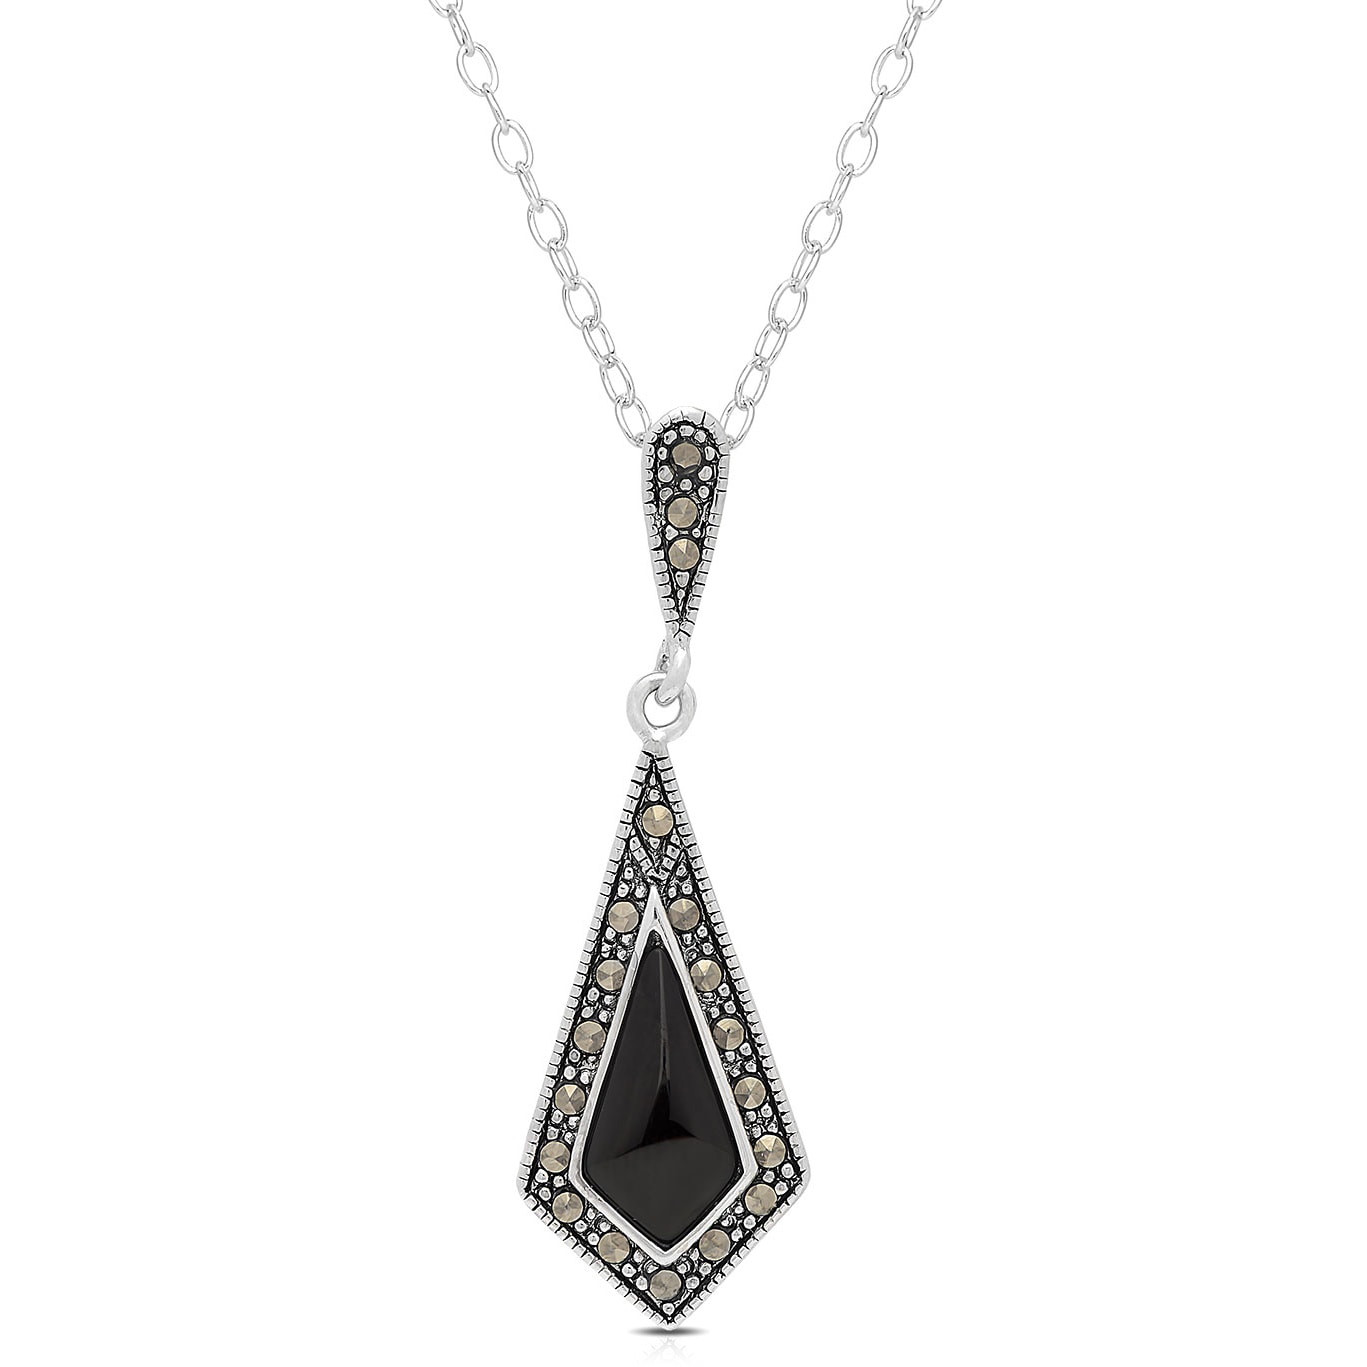 Dolce Giavonna Silverplated Black Onyx and Marcasite Necklace